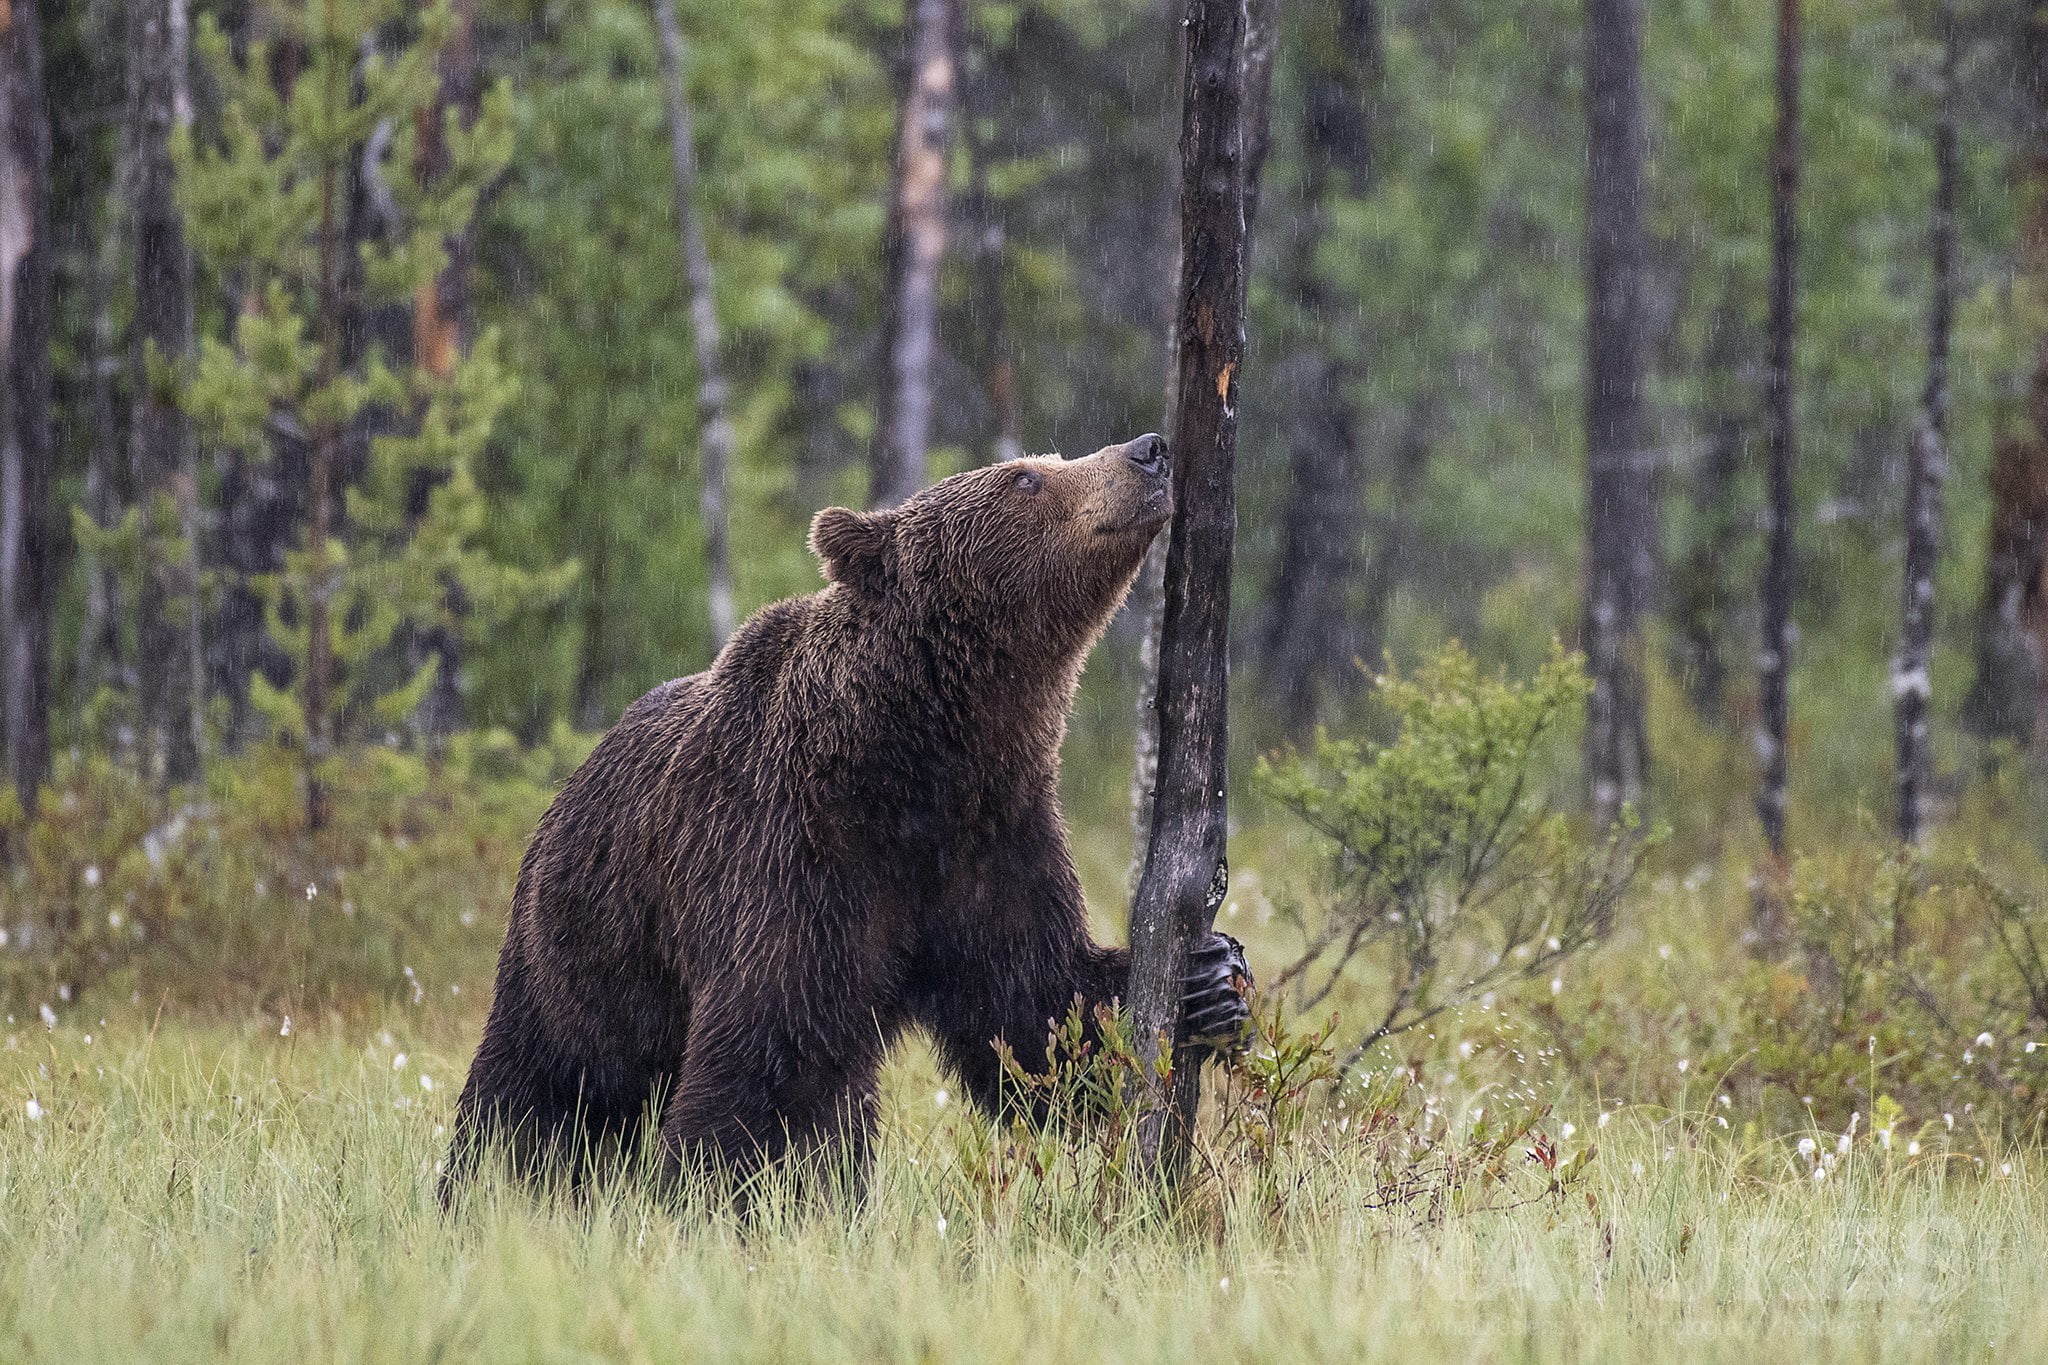 One of the wild brown bears in the rain photographed during the NaturesLens Wild Brown Bears of Finland photography holiday